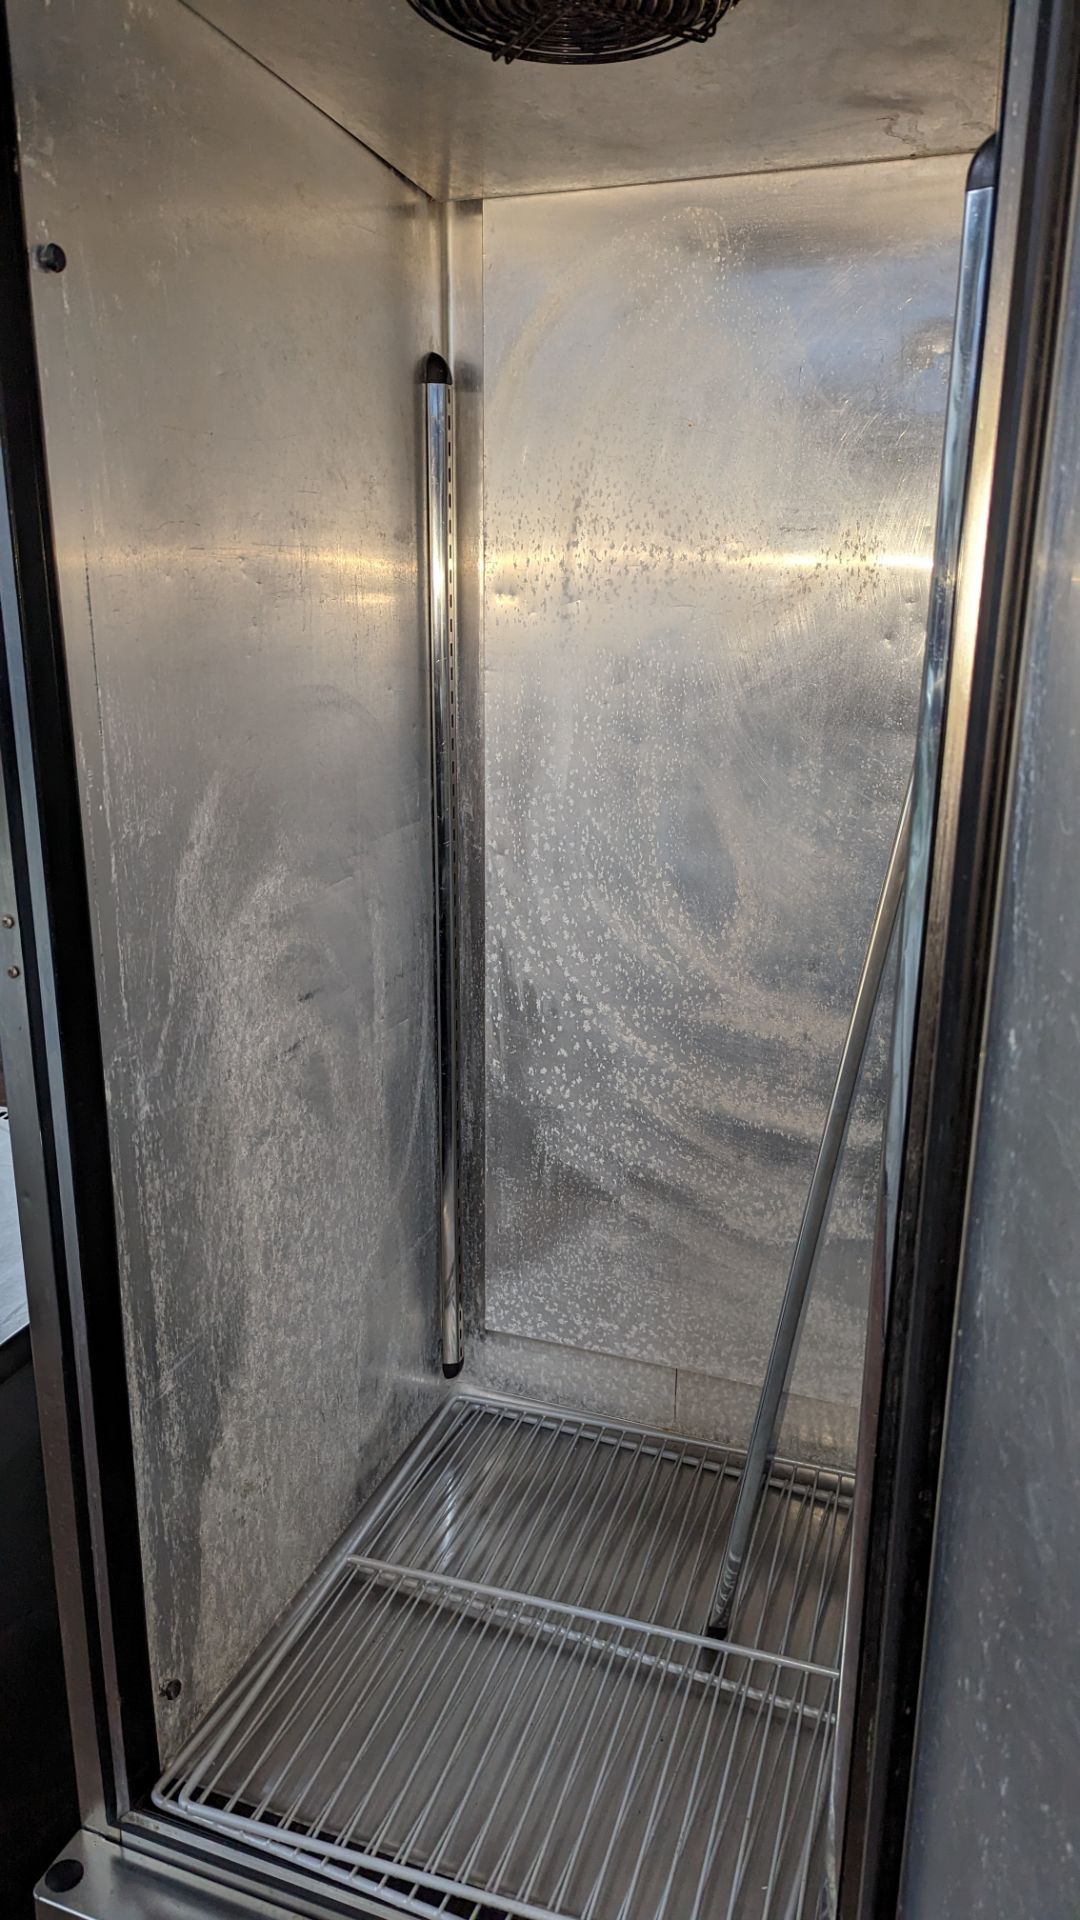 Foster stainless steel large freezer - Image 6 of 6